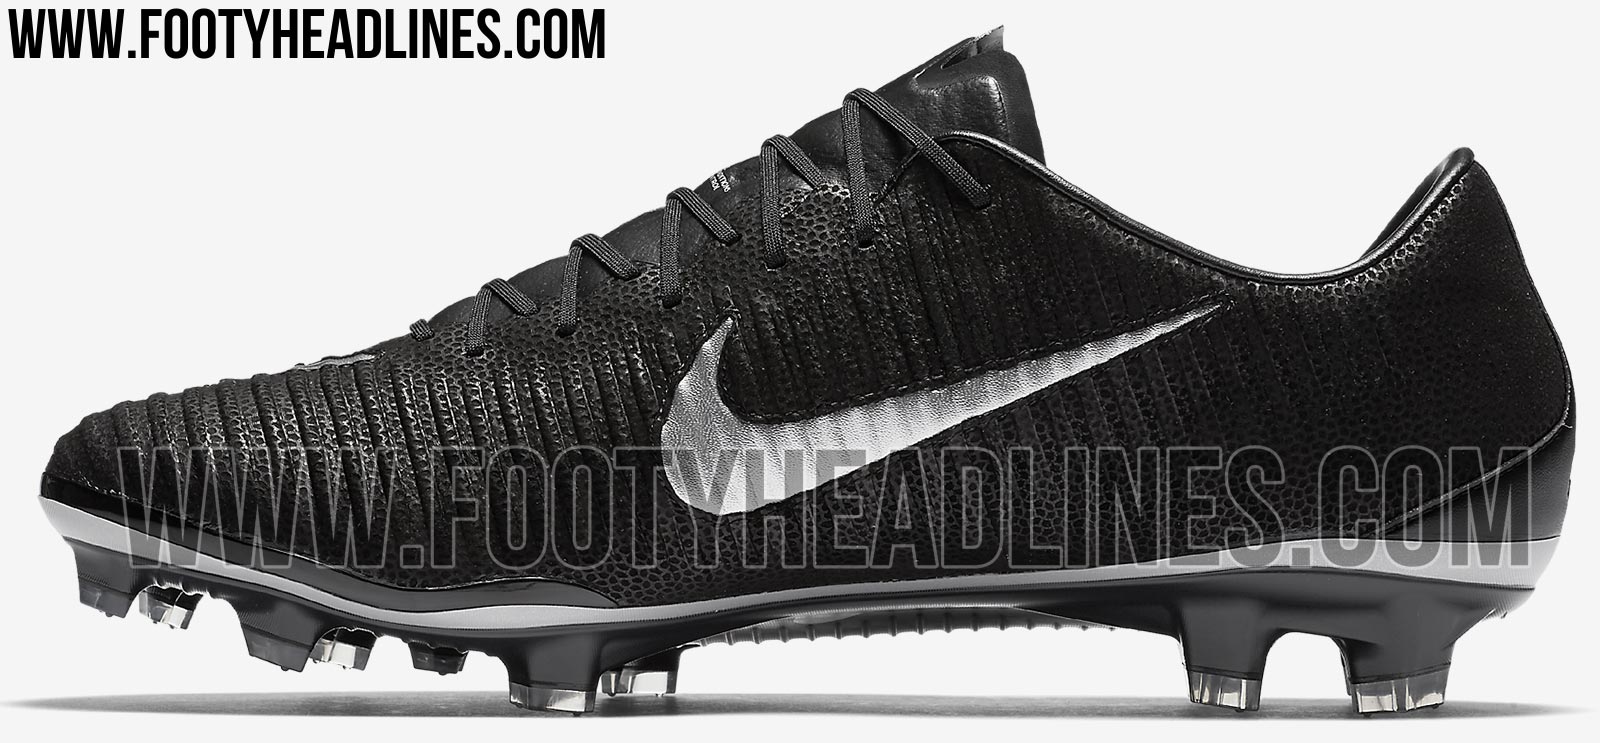 Black Nike Mercurial Vapor XI Tech Craft K-Leather Boots Leaked - Footy ...